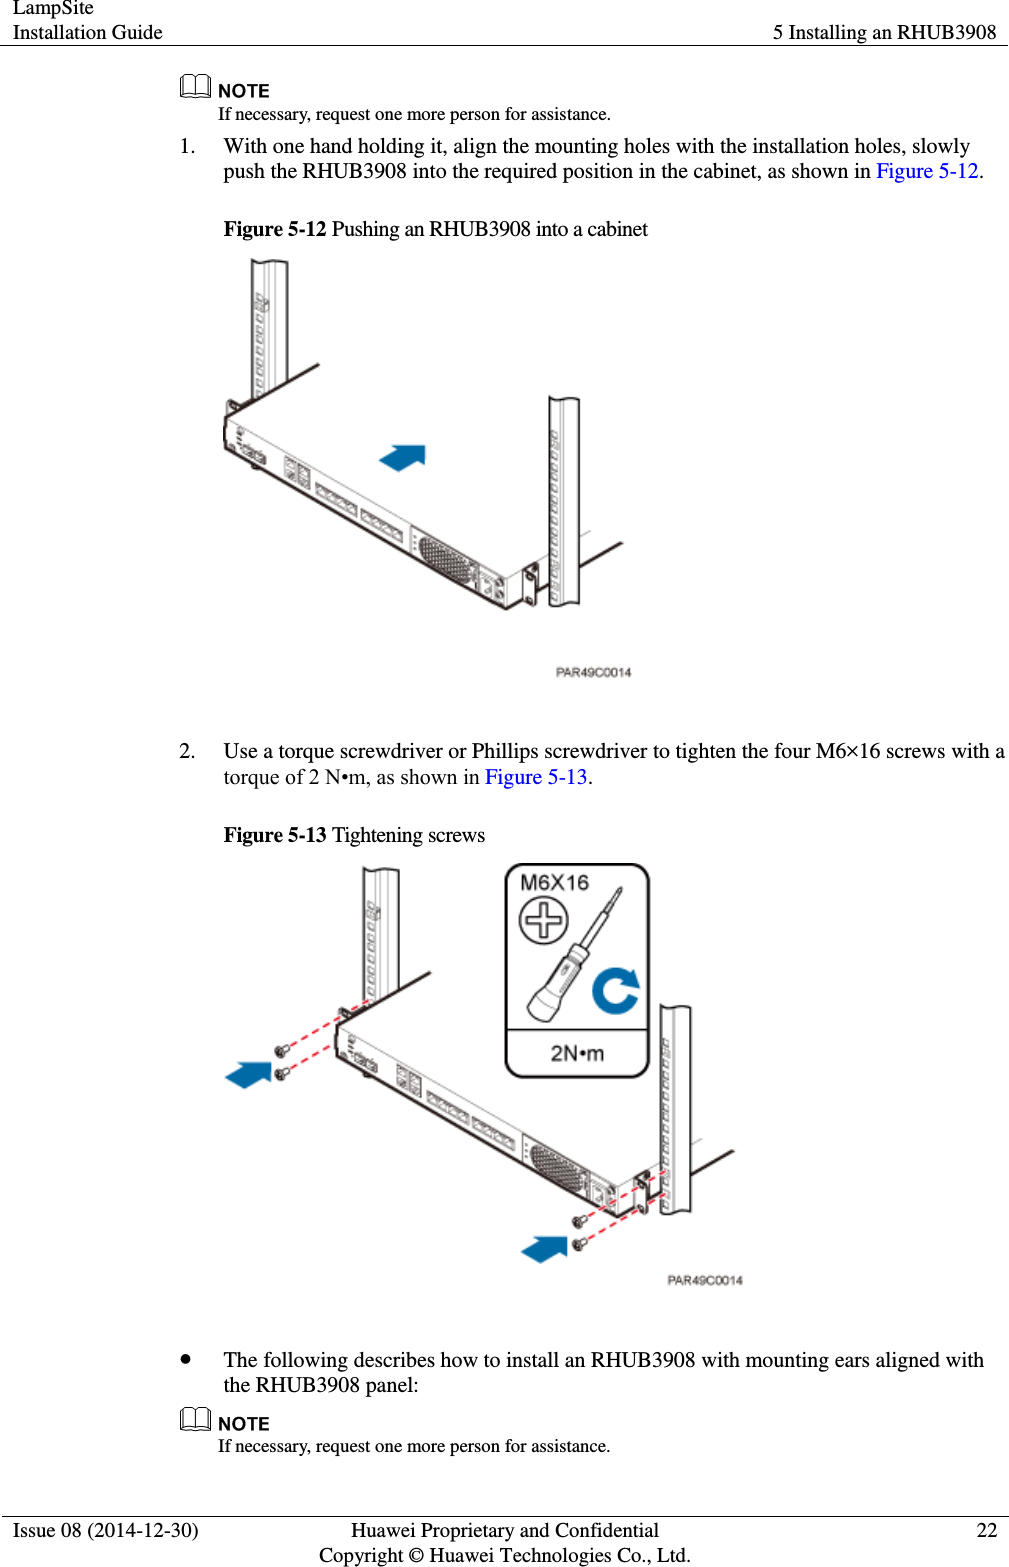 LampSite Installation Guide 5 Installing an RHUB3908  Issue 08 (2014-12-30) Huawei Proprietary and Confidential                                     Copyright © Huawei Technologies Co., Ltd. 22   If necessary, request one more person for assistance.   1. With one hand holding it, align the mounting holes with the installation holes, slowly push the RHUB3908 into the required position in the cabinet, as shown in Figure 5-12.   Figure 5-12 Pushing an RHUB3908 into a cabinet   2. Use a torque screwdriver or Phillips screwdriver to tighten the four M6×16 screws with a torque of 2 N•m, as shown in Figure 5-13.   Figure 5-13 Tightening screws    The following describes how to install an RHUB3908 with mounting ears aligned with the RHUB3908 panel:    If necessary, request one more person for assistance.   